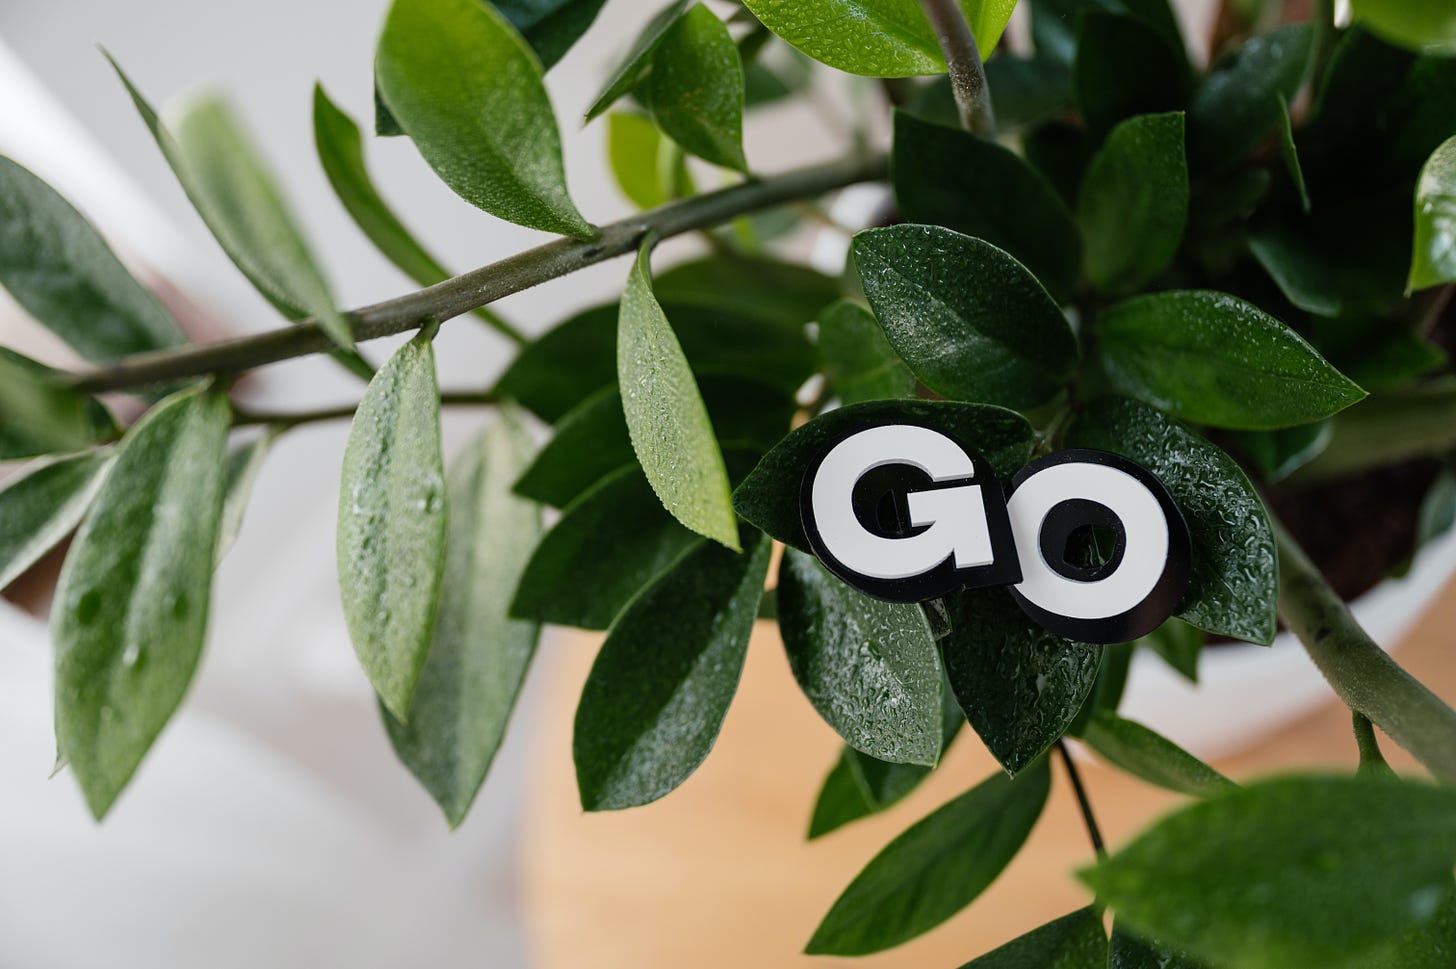 The word "Go" laying on a plant's green leaves.